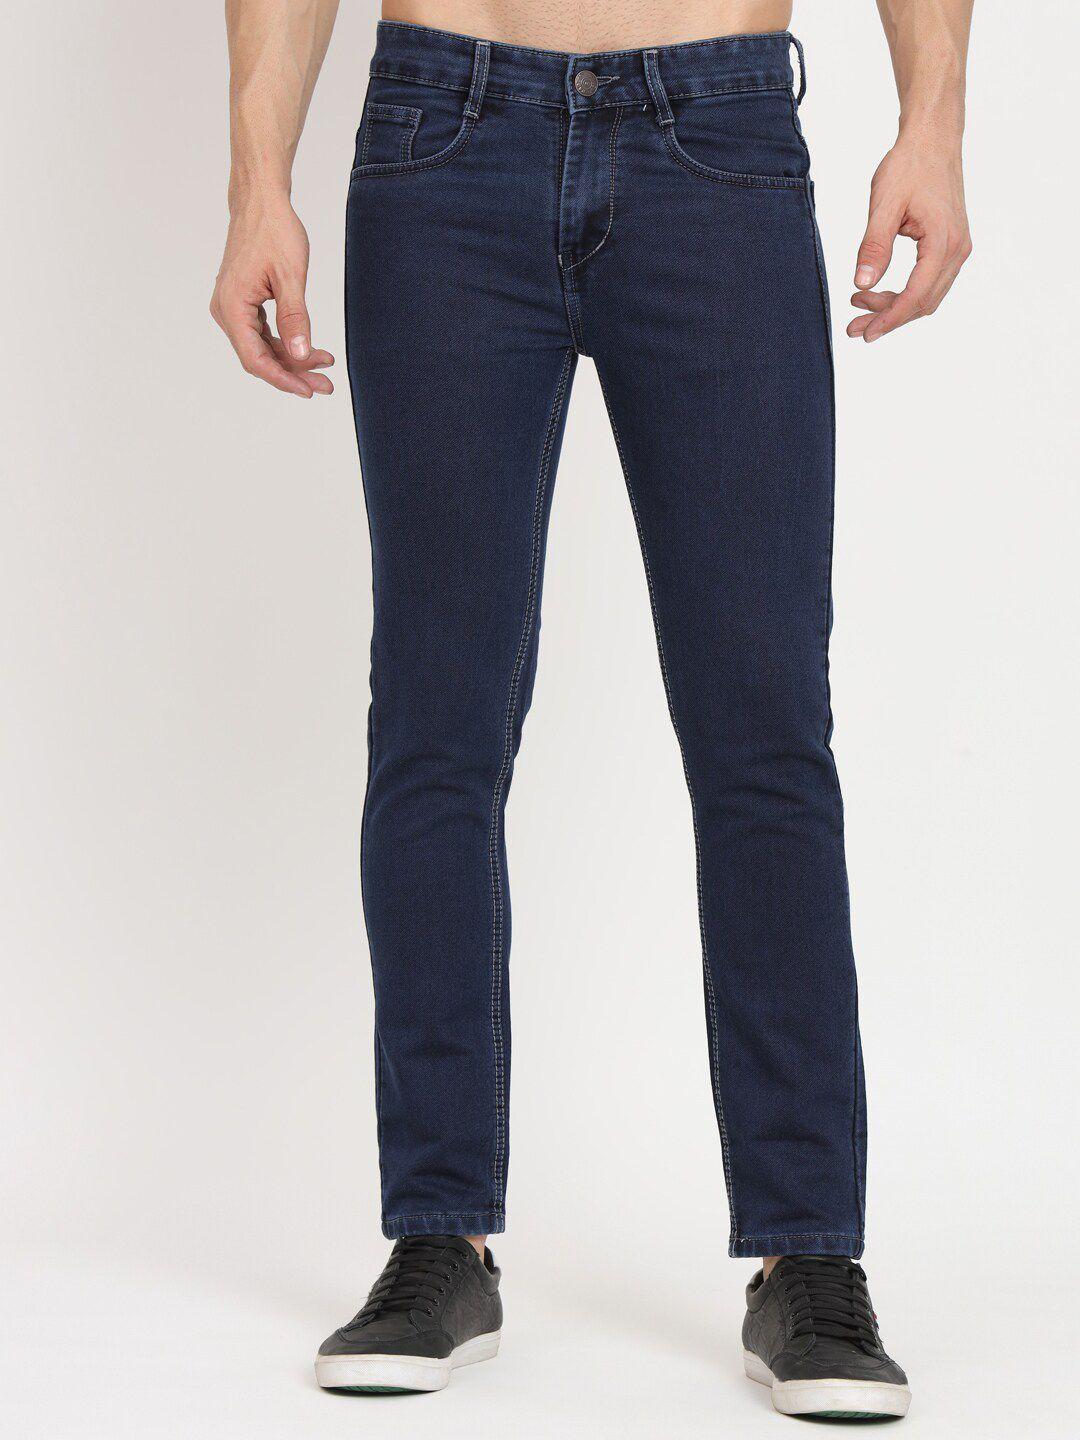 ragzo-men-slim-fit-low-rise-clean-look-stretchable-jeans